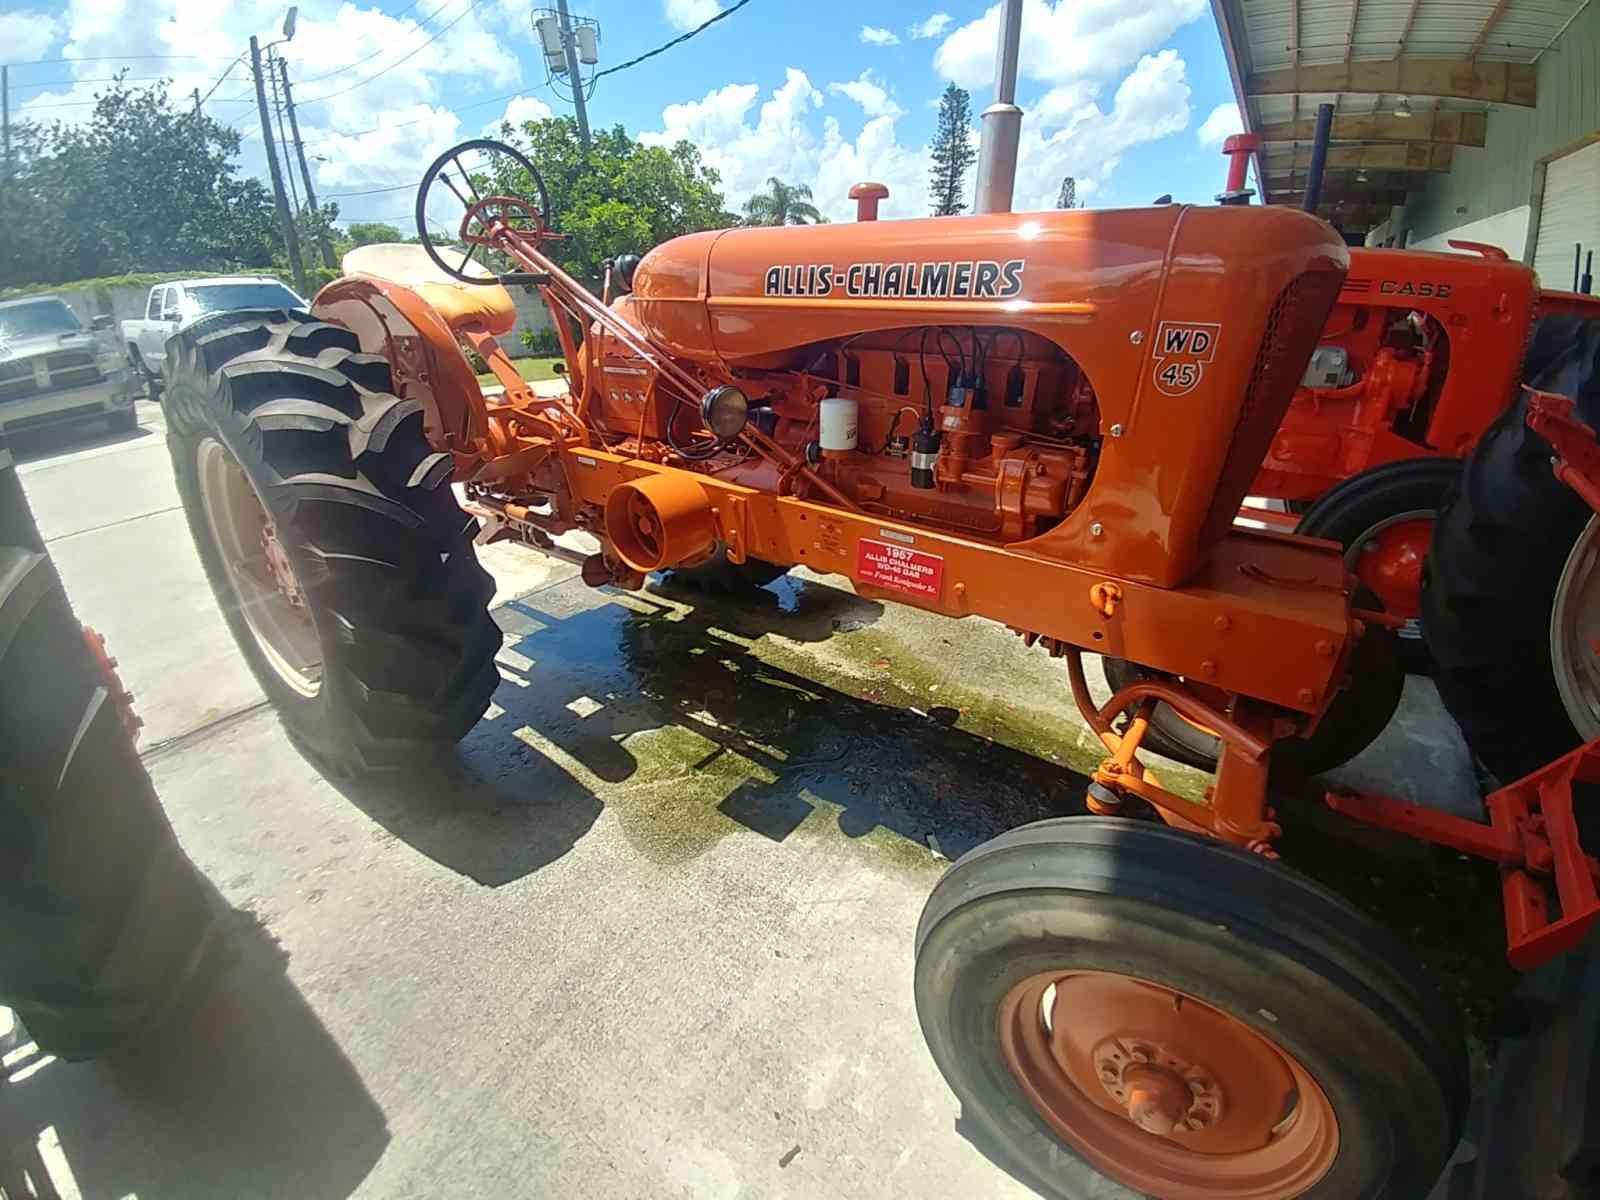 Allis Chalmers WD45 Tractor, s/n WD232504: Wide Front, Gas, 1957 Year Model